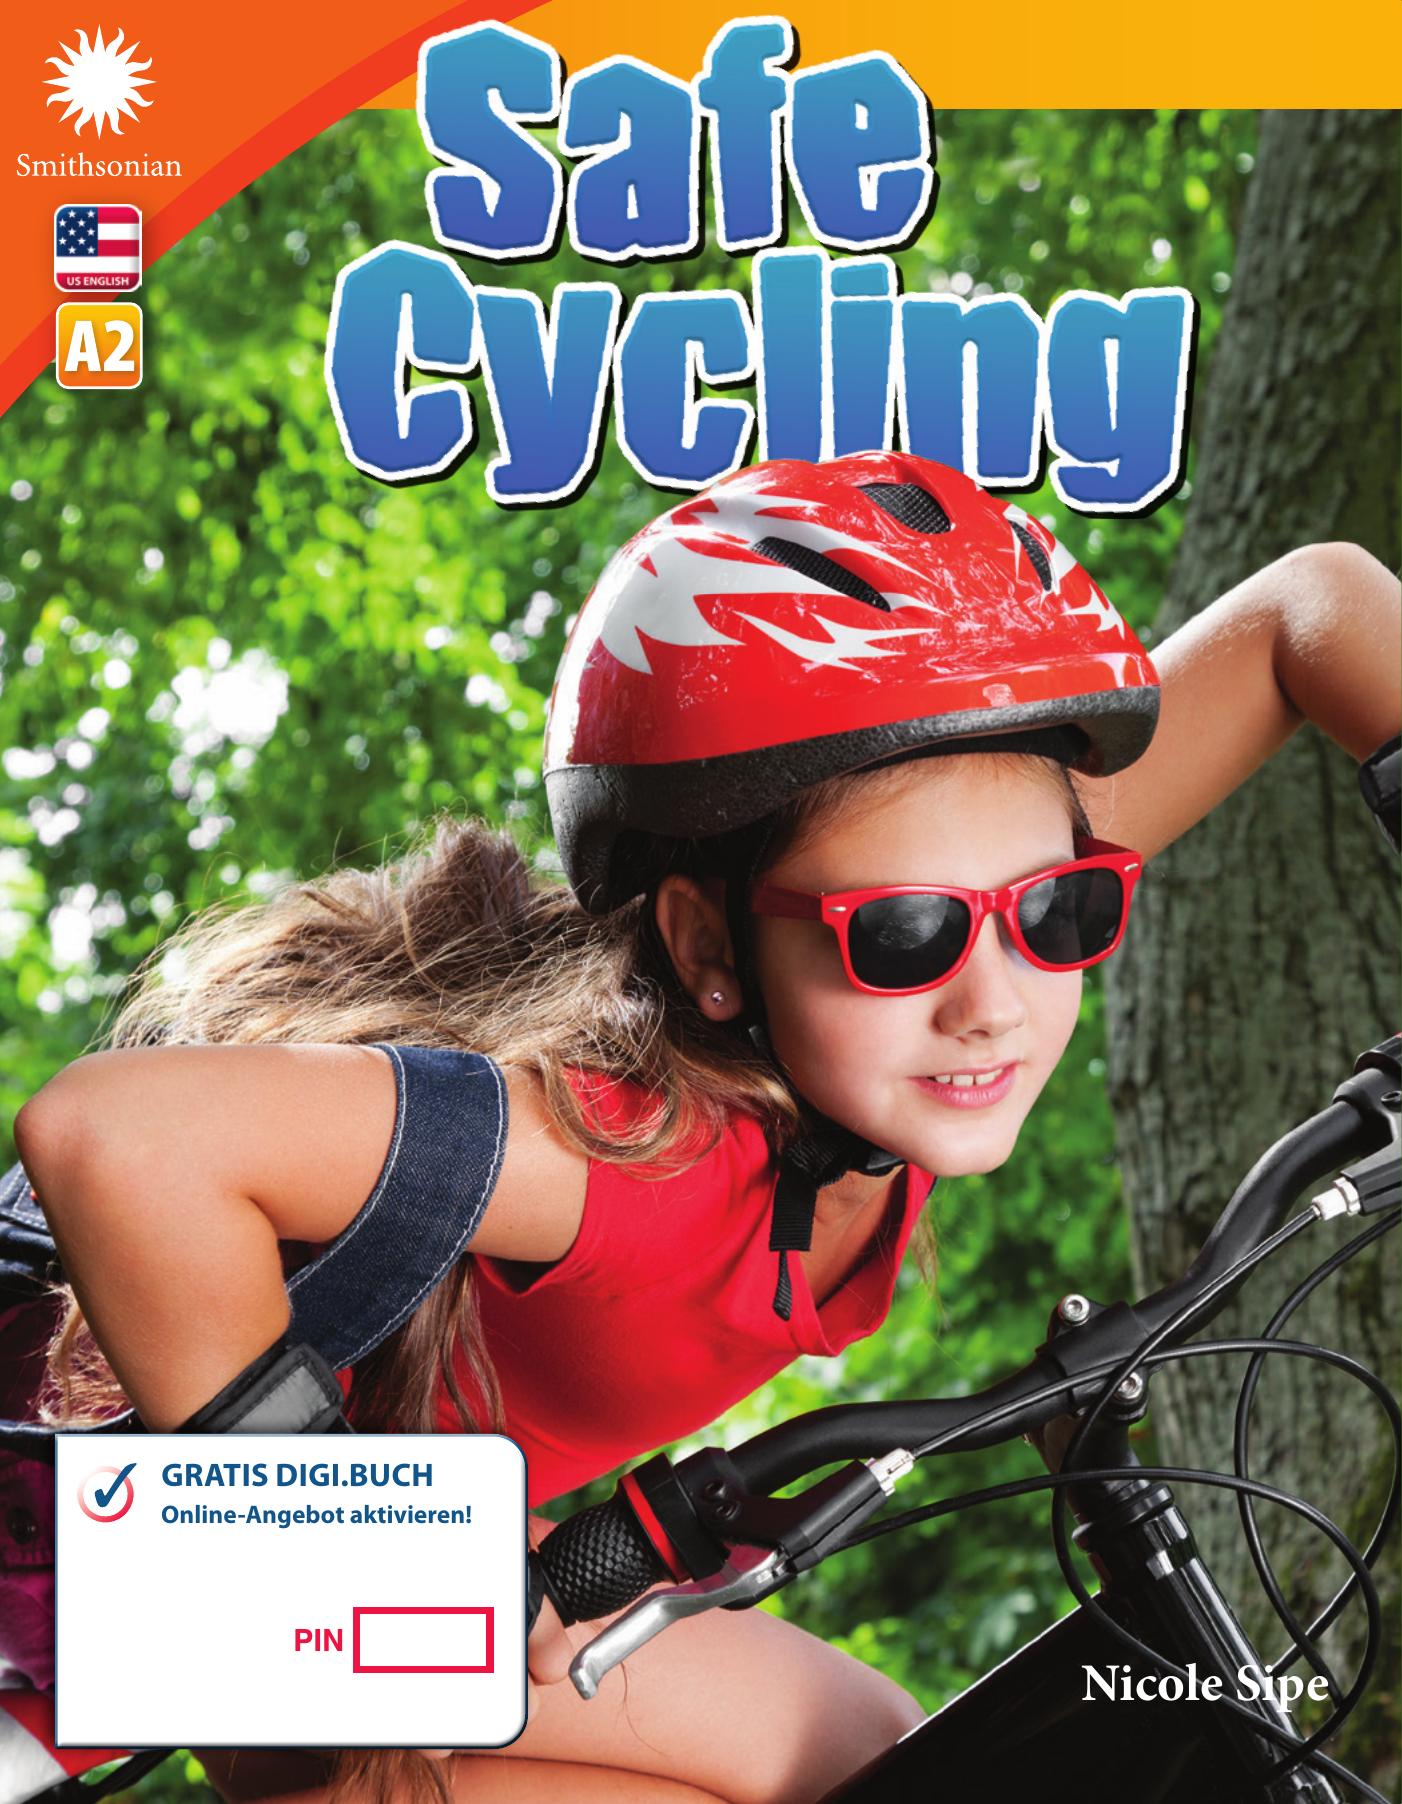 A2 – Safe Cycling